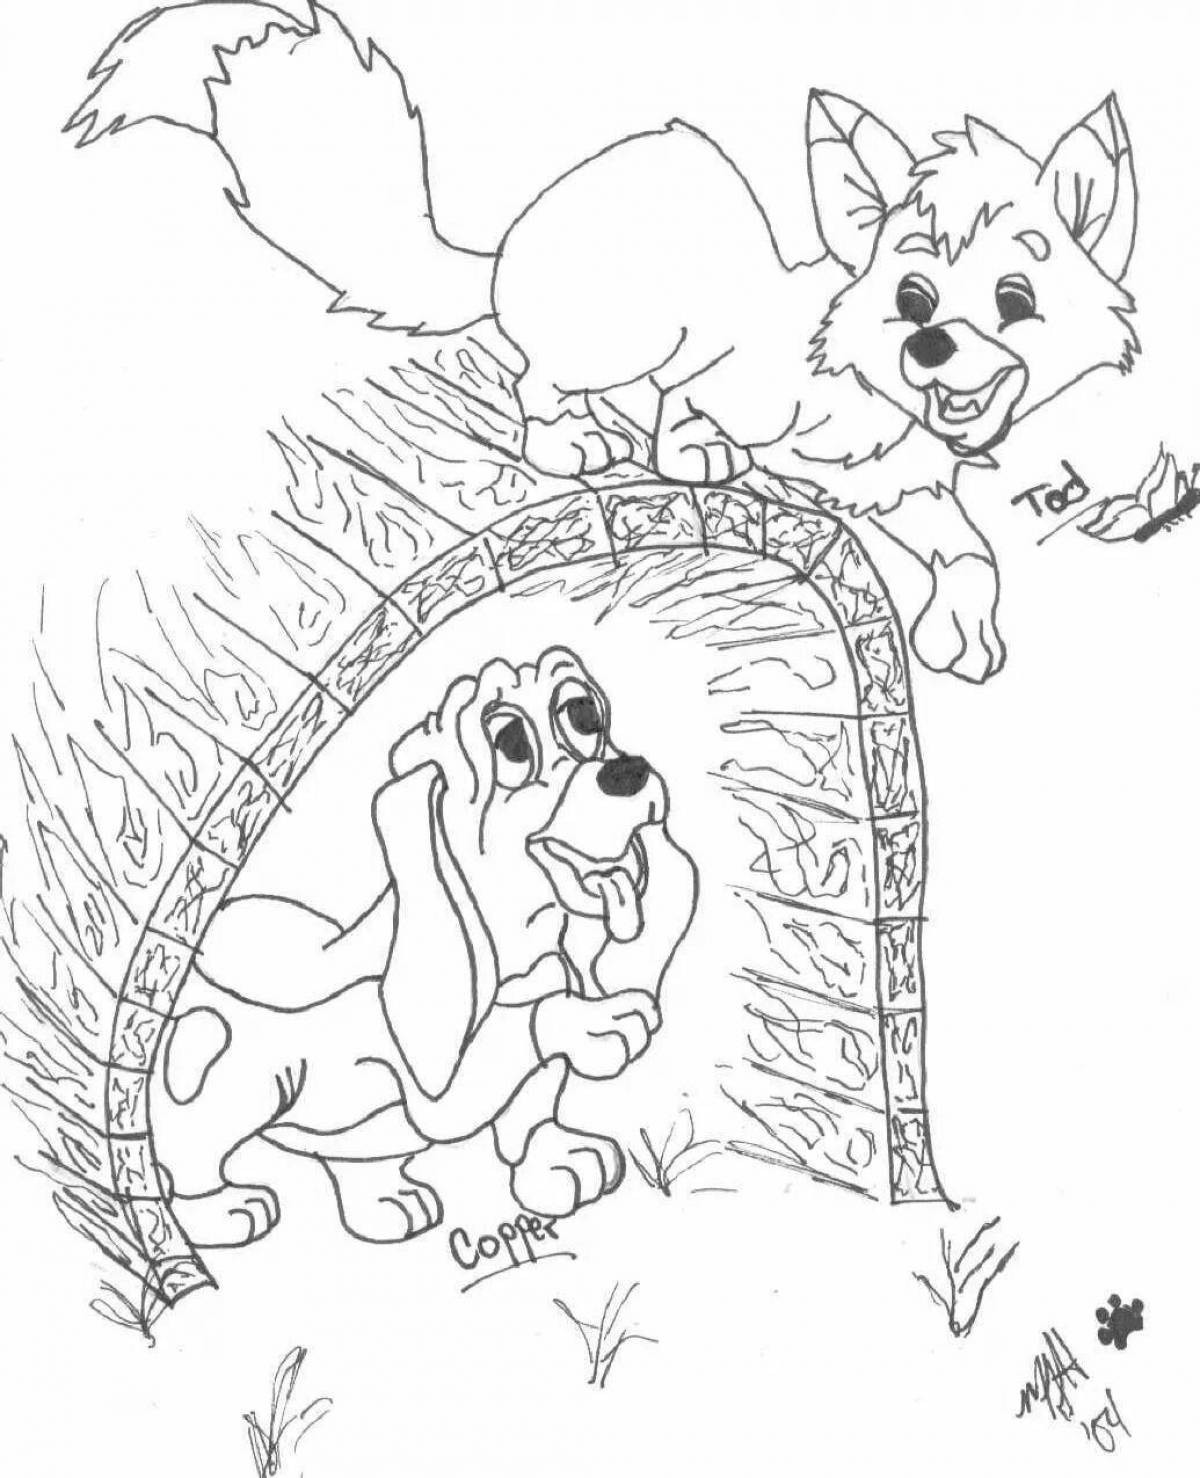 Cute fox and dog coloring page